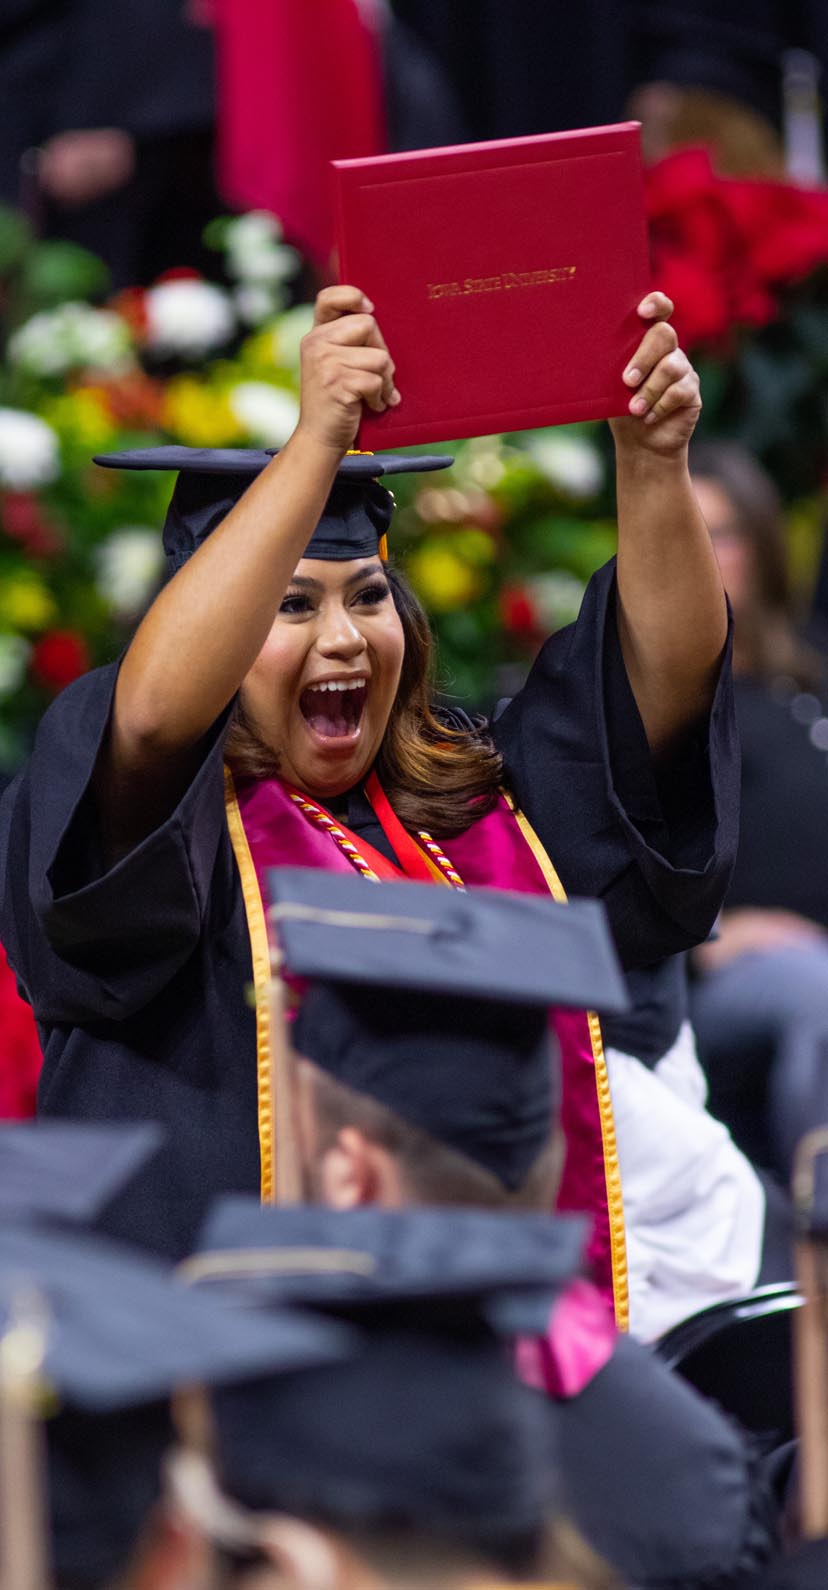 A graduate celebrates after receiving her diploma during the commencement ceremony.